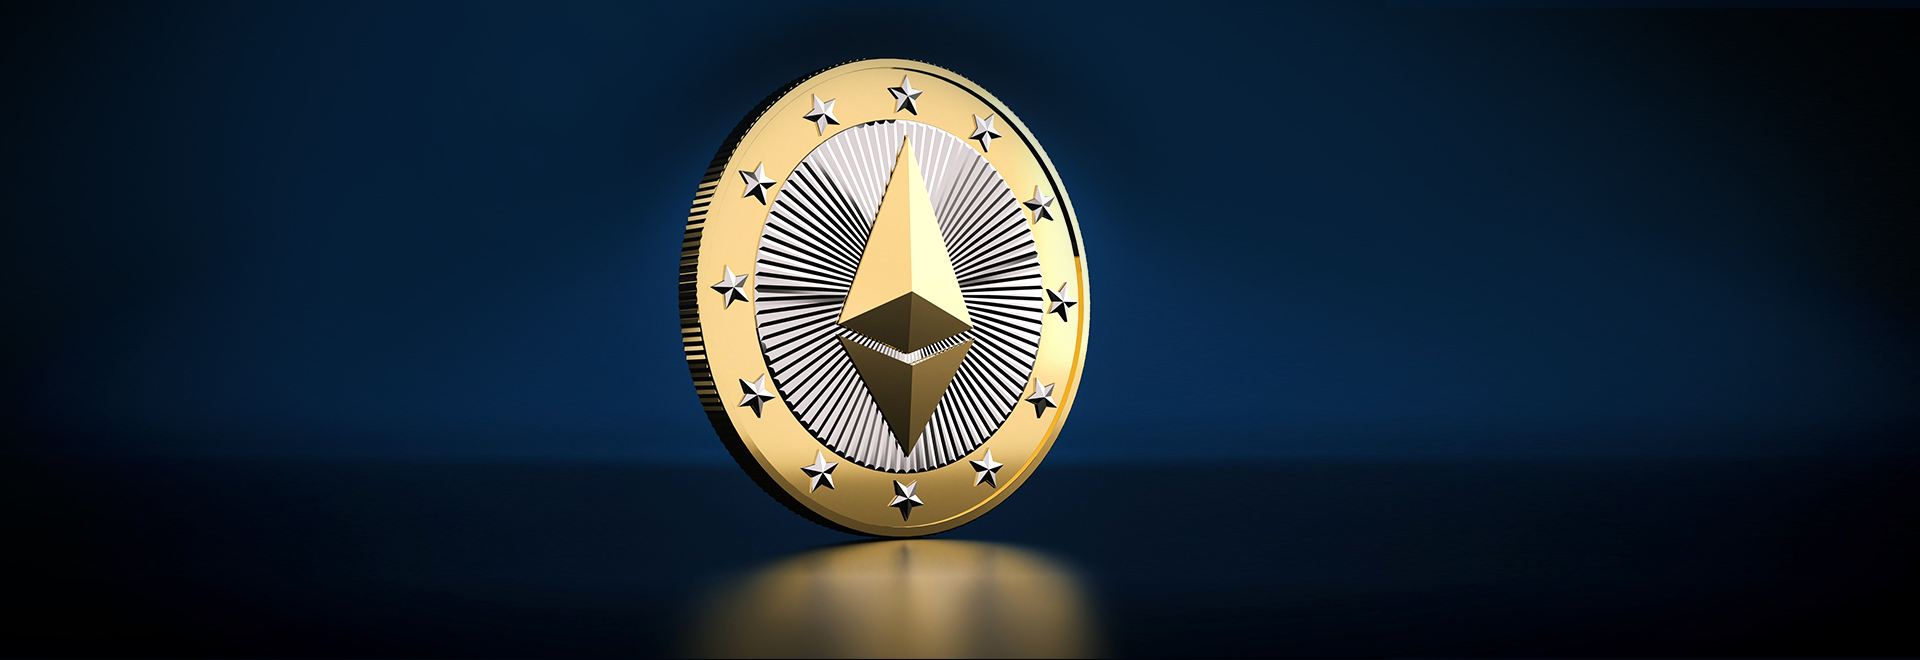 ETH Highlights Investors' Growing Confidence In Ethereum